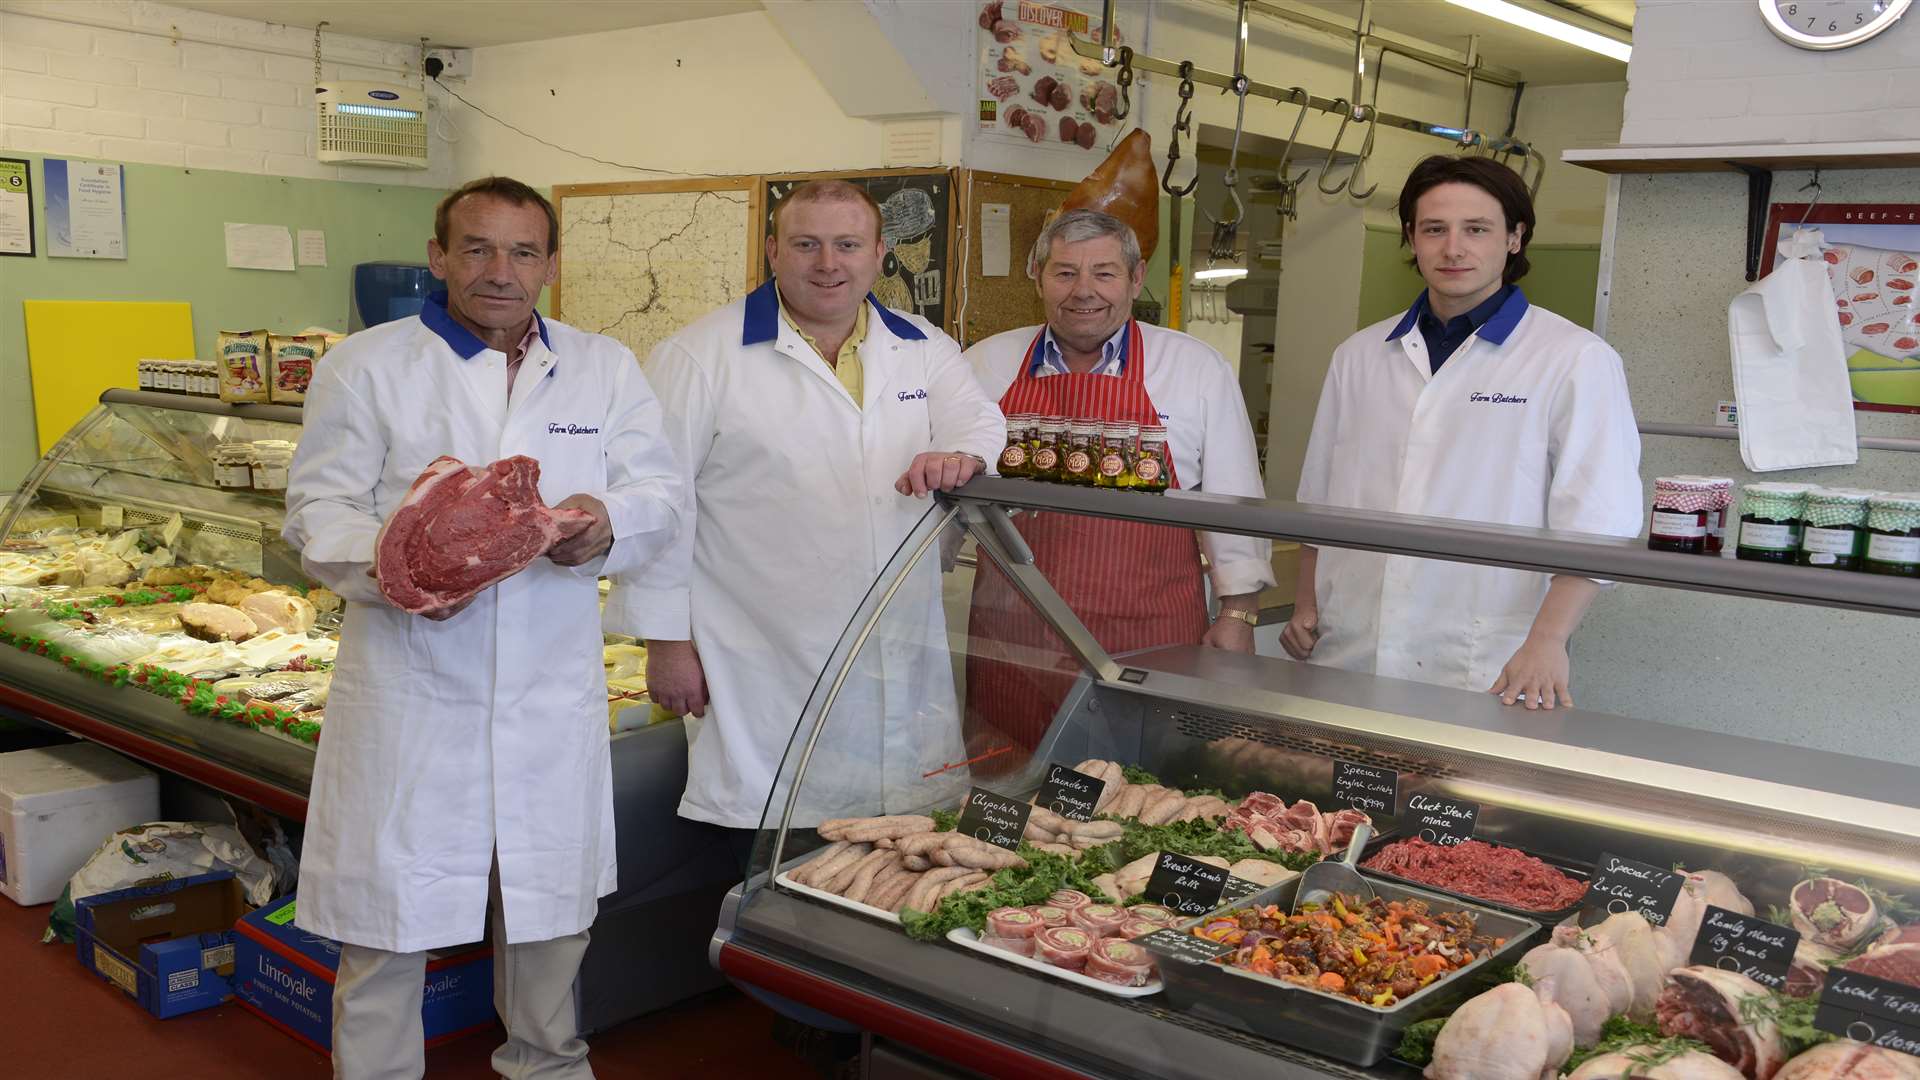 David "Dazy" Saunders, second left, at Farm Butchers St Michael's with, left to right, owner John Howe, Mick Clayson and Toby Howe.